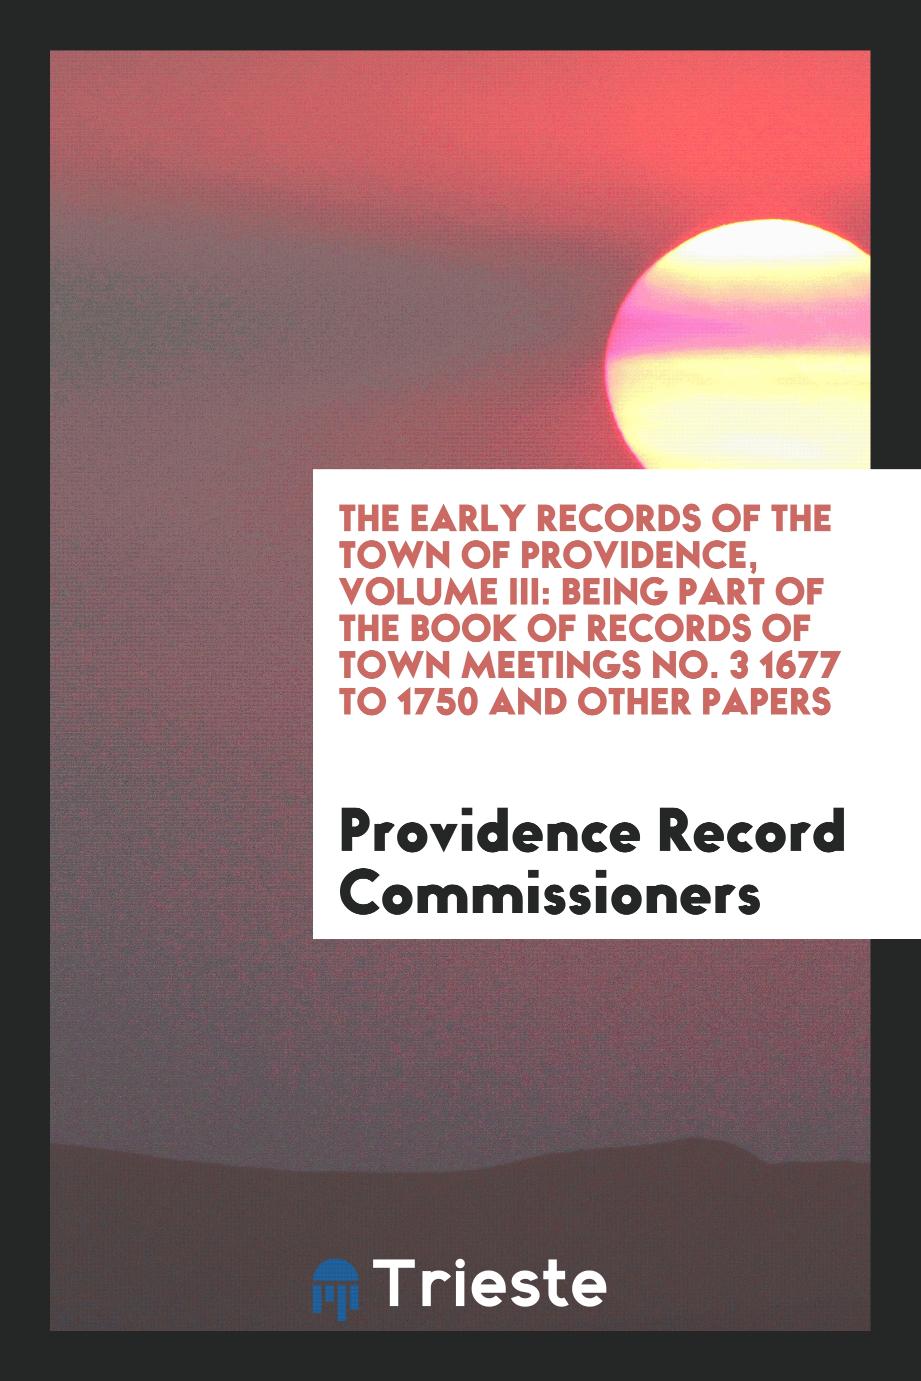 The Early Records of the Town of Providence, Volume III: Being Part of the Book of Records of Town Meetings No. 3 1677 to 1750 and Other Papers